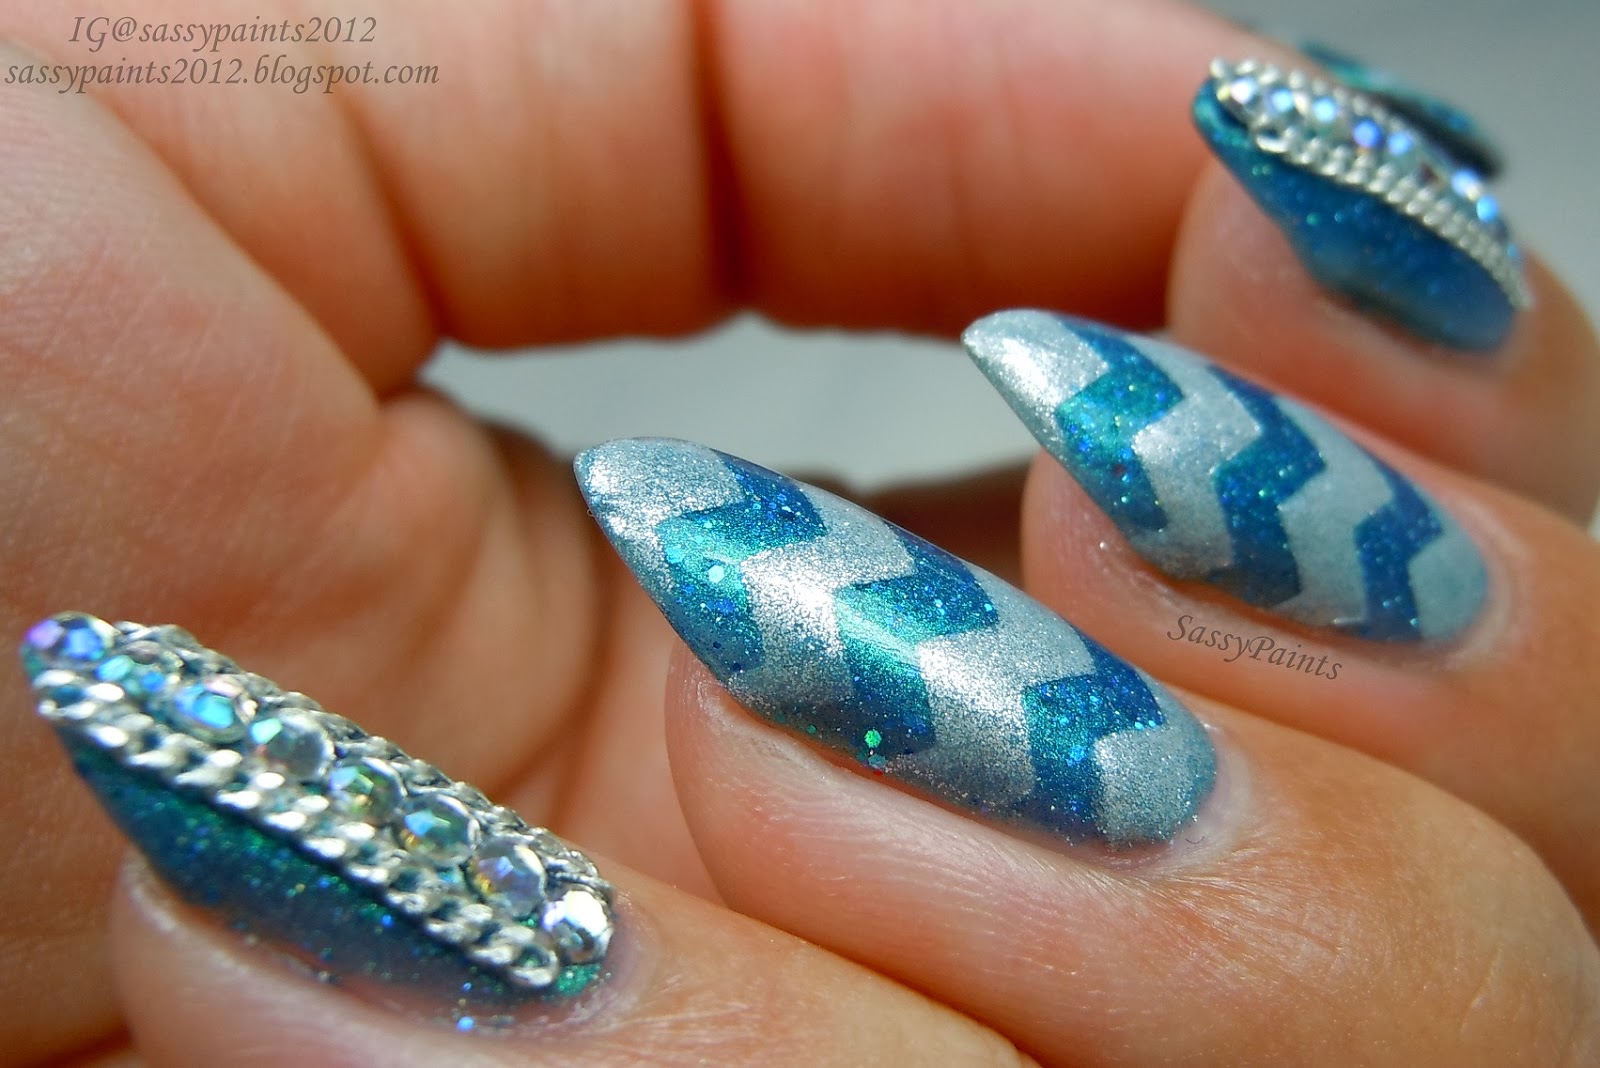 9. How to Use Chevron Nail Vinyls for Perfect Lines Every Time - wide 4